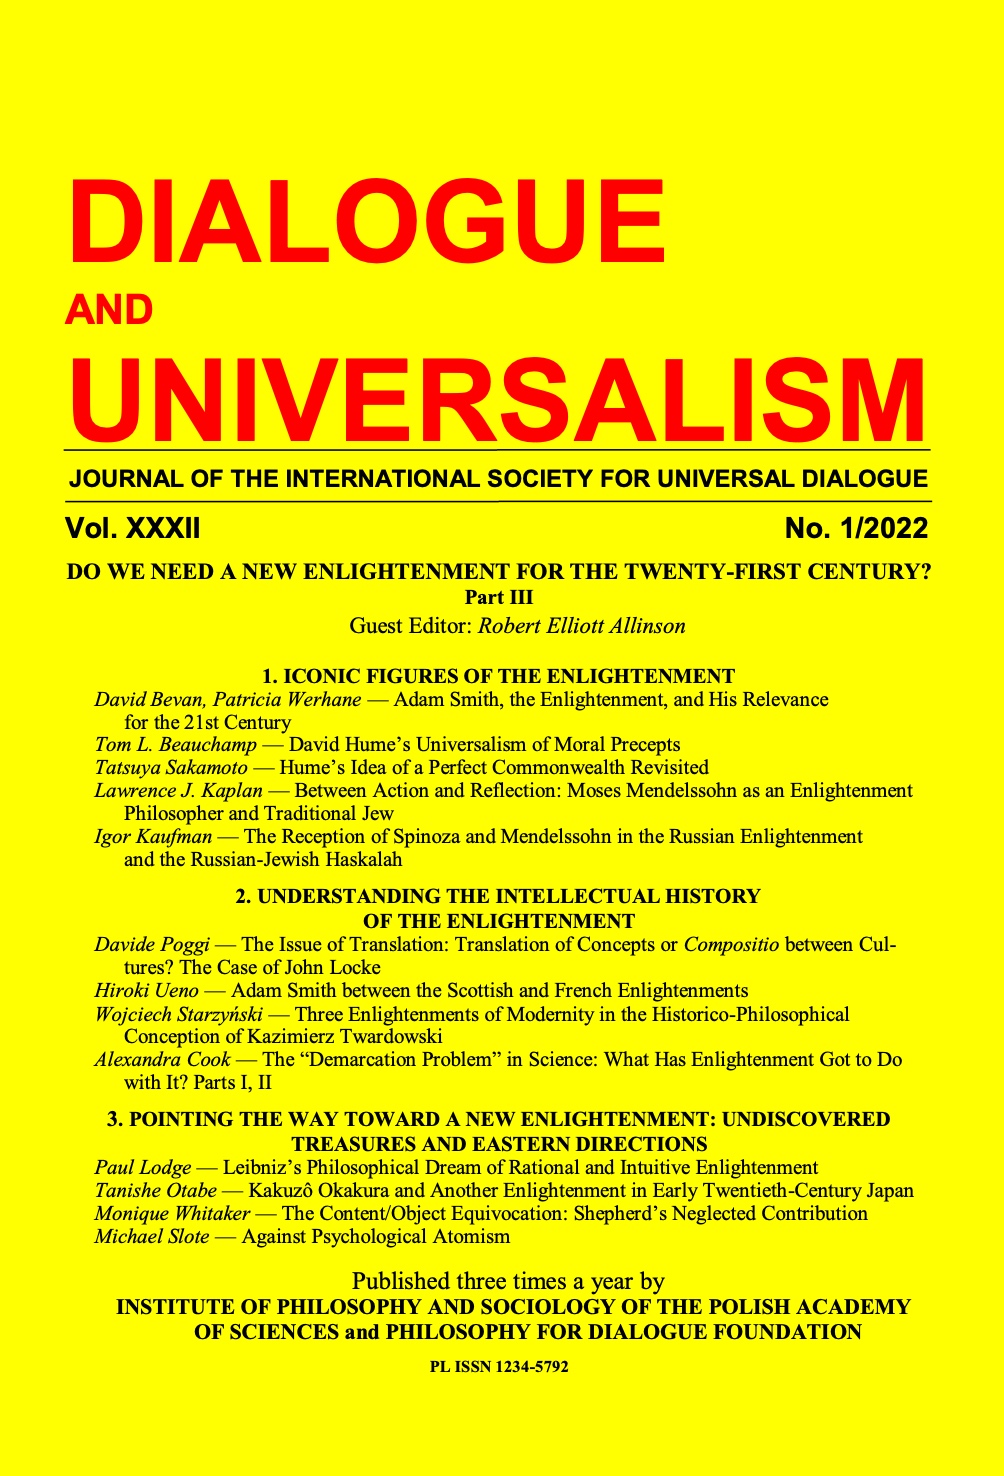 PLATO’S DIALOGUES AS A FOUNDATION FOR UNIVERSAL DIALOGUE